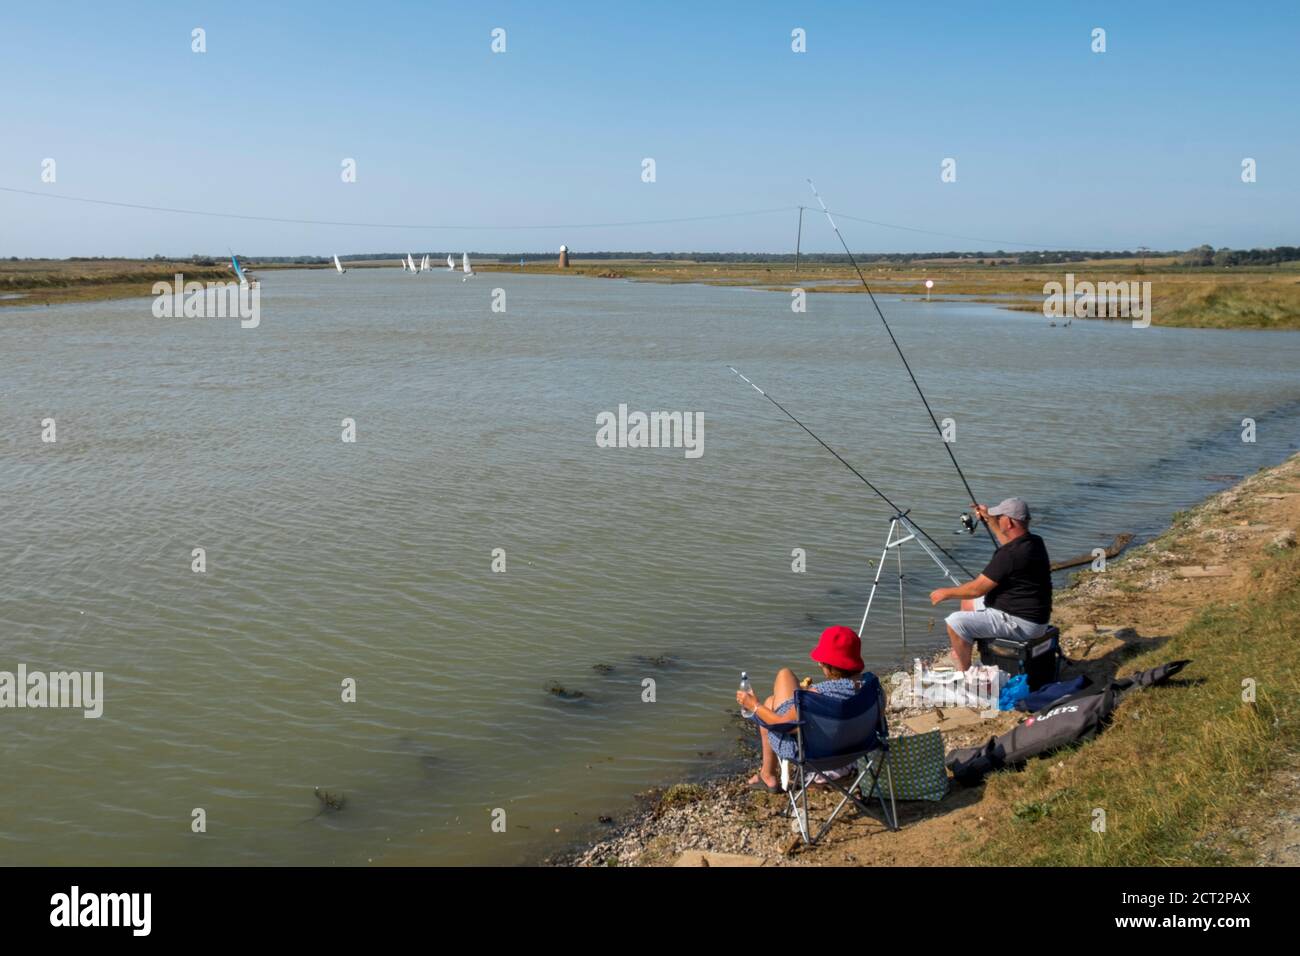 Angling on The River Blyth, Southwold, Suffolk, England, UK. Stock Photo